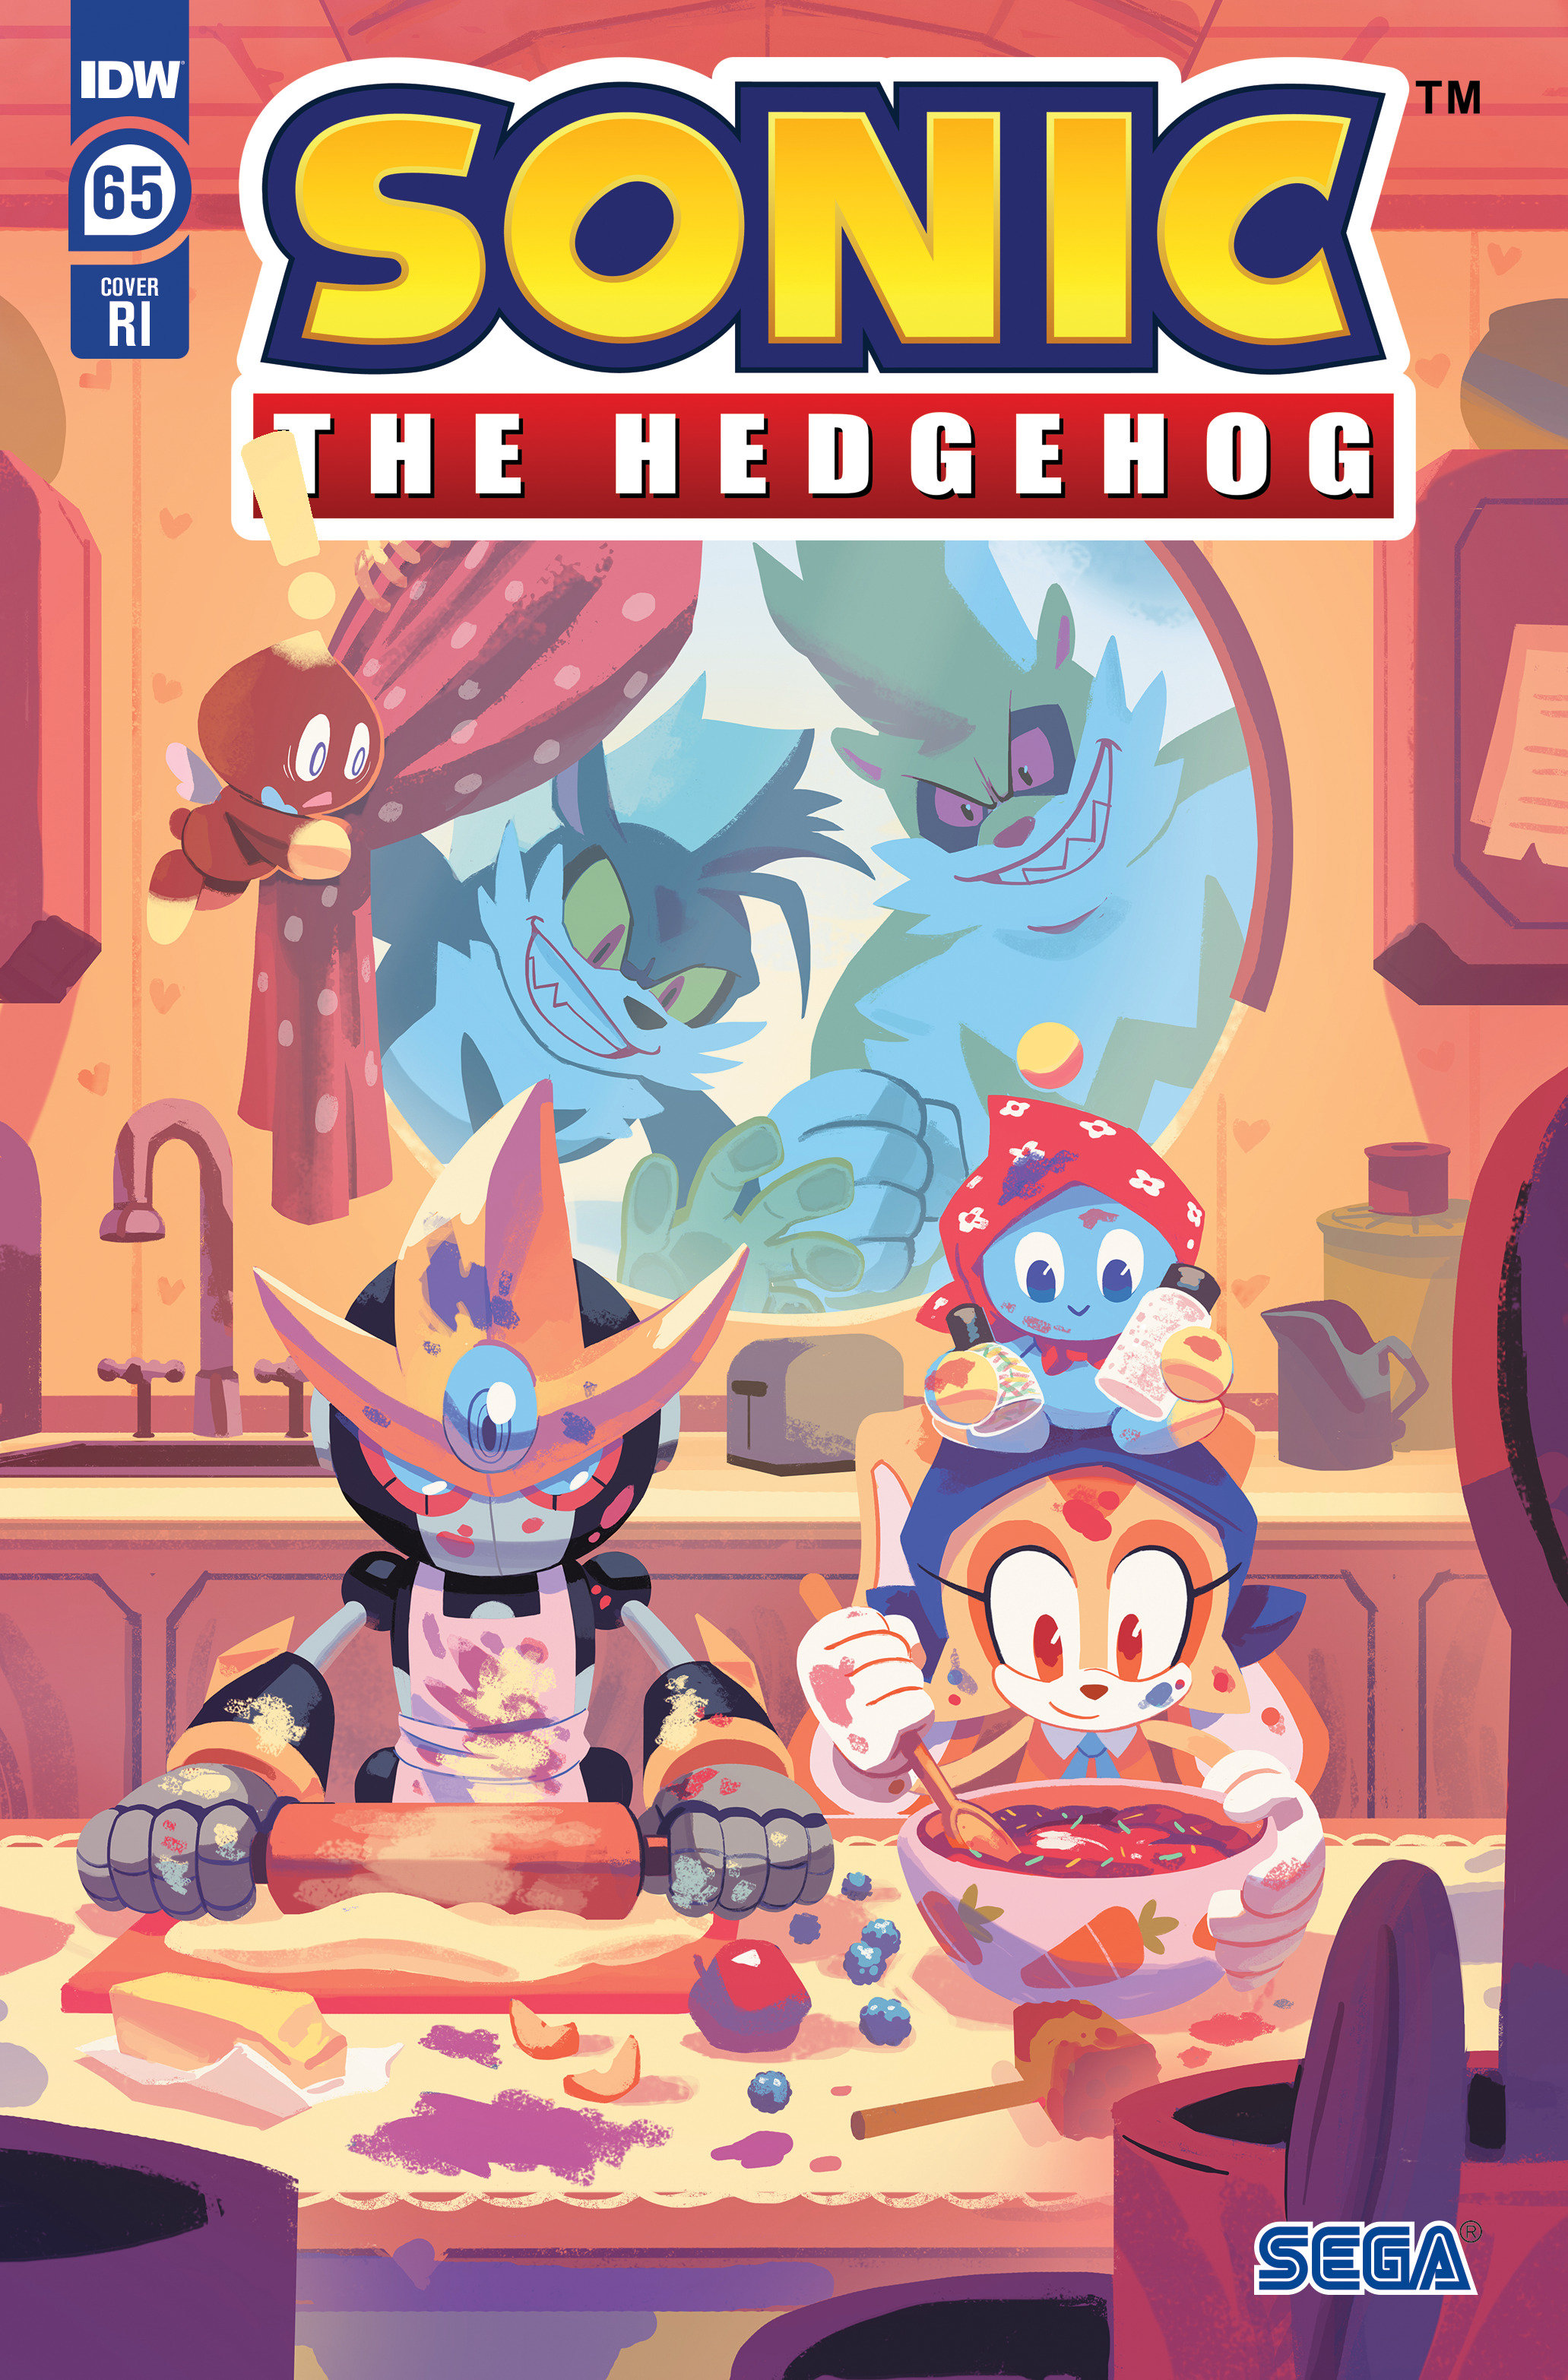 Sonic the Hedgehog #65 Fourdraine 1 for 10 Incentive